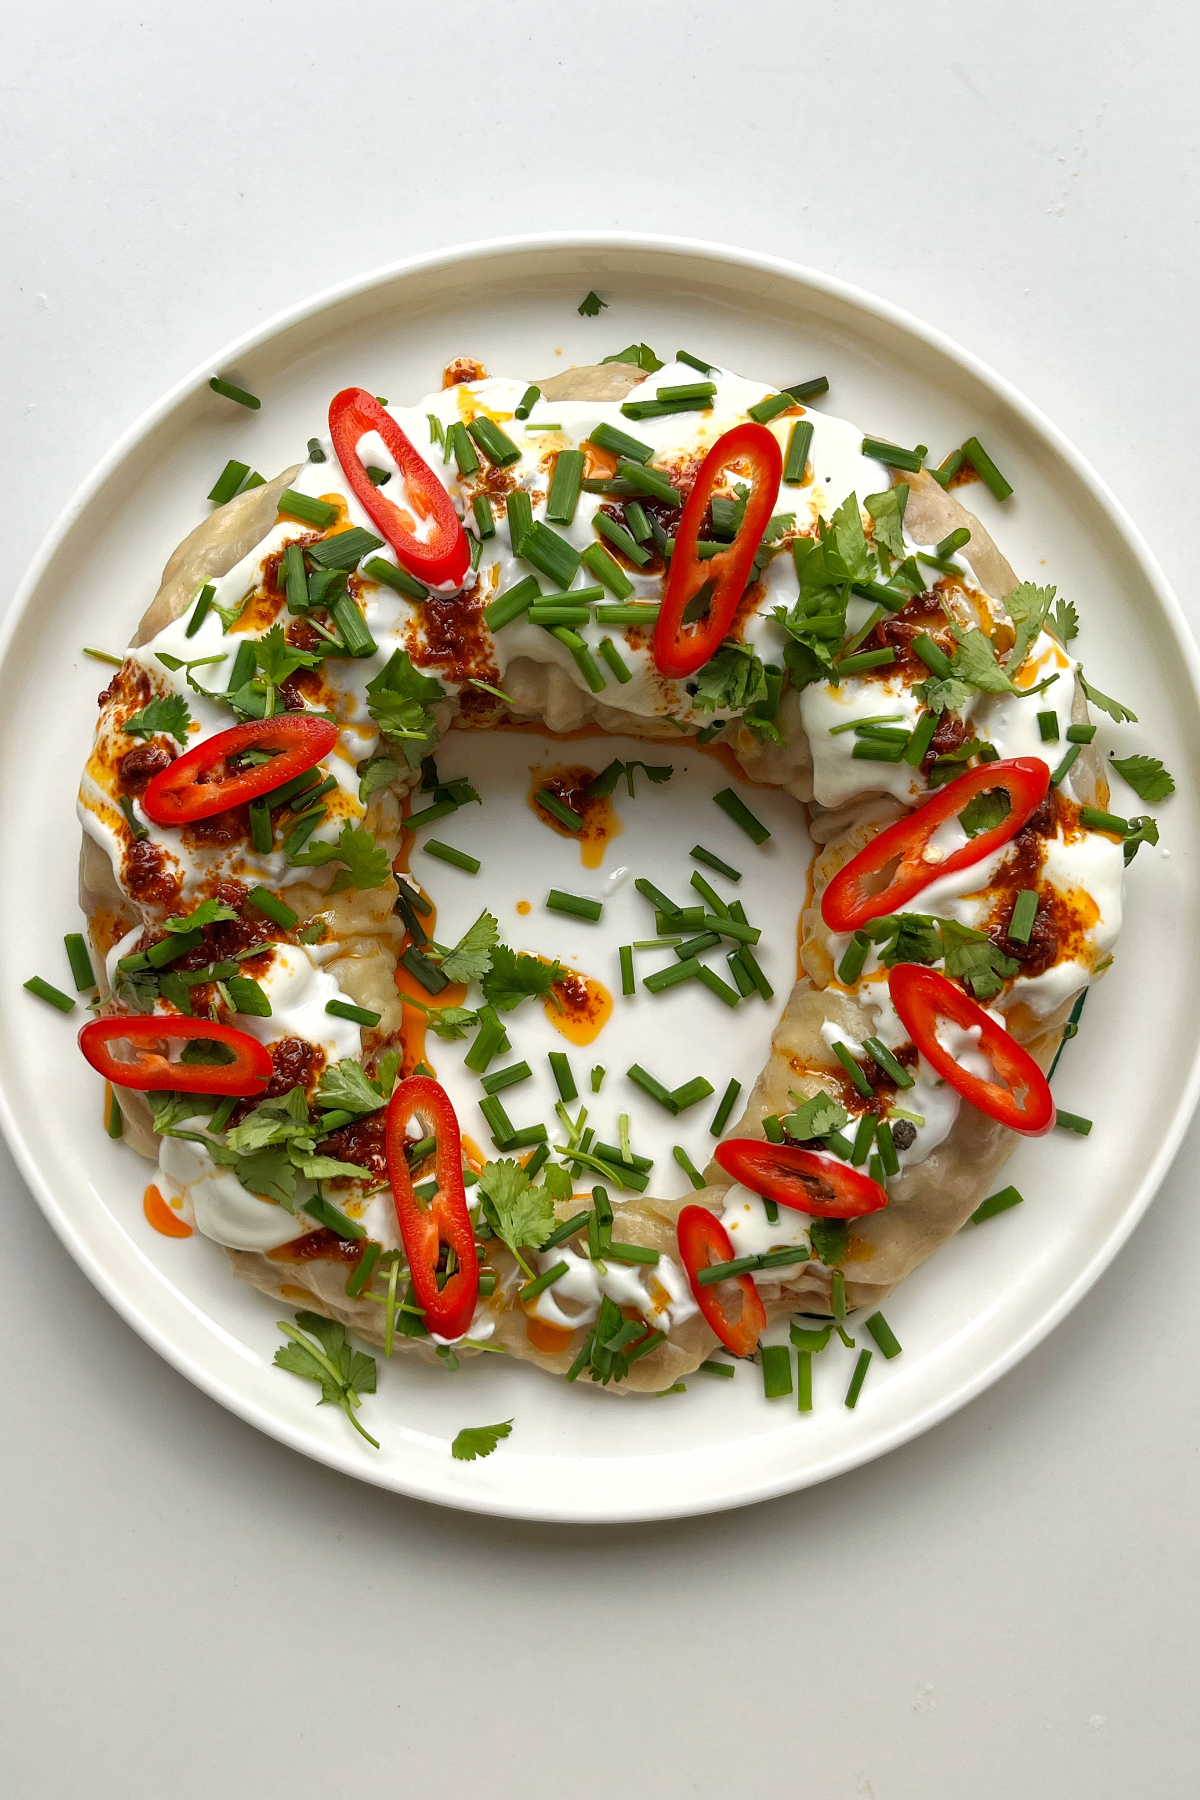 Dumpling wreath on a white plate topped with yoghurt, harissa oil, chives, and sliced chilli. 